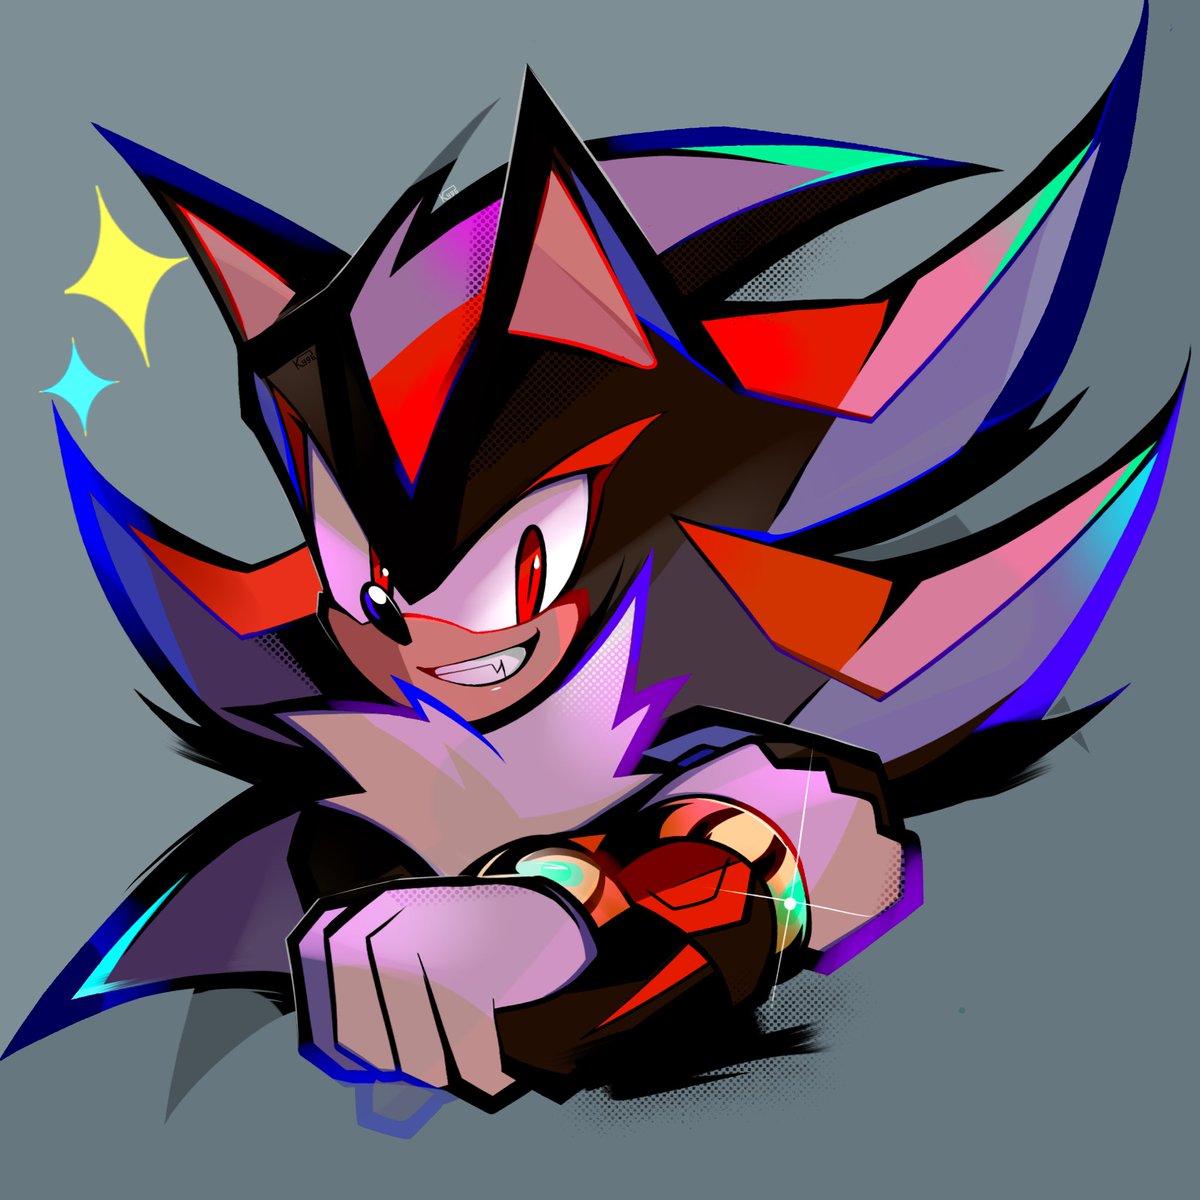 #ShadowTheHedegehog 
Redrew the new rumble Shadow icon for fun!